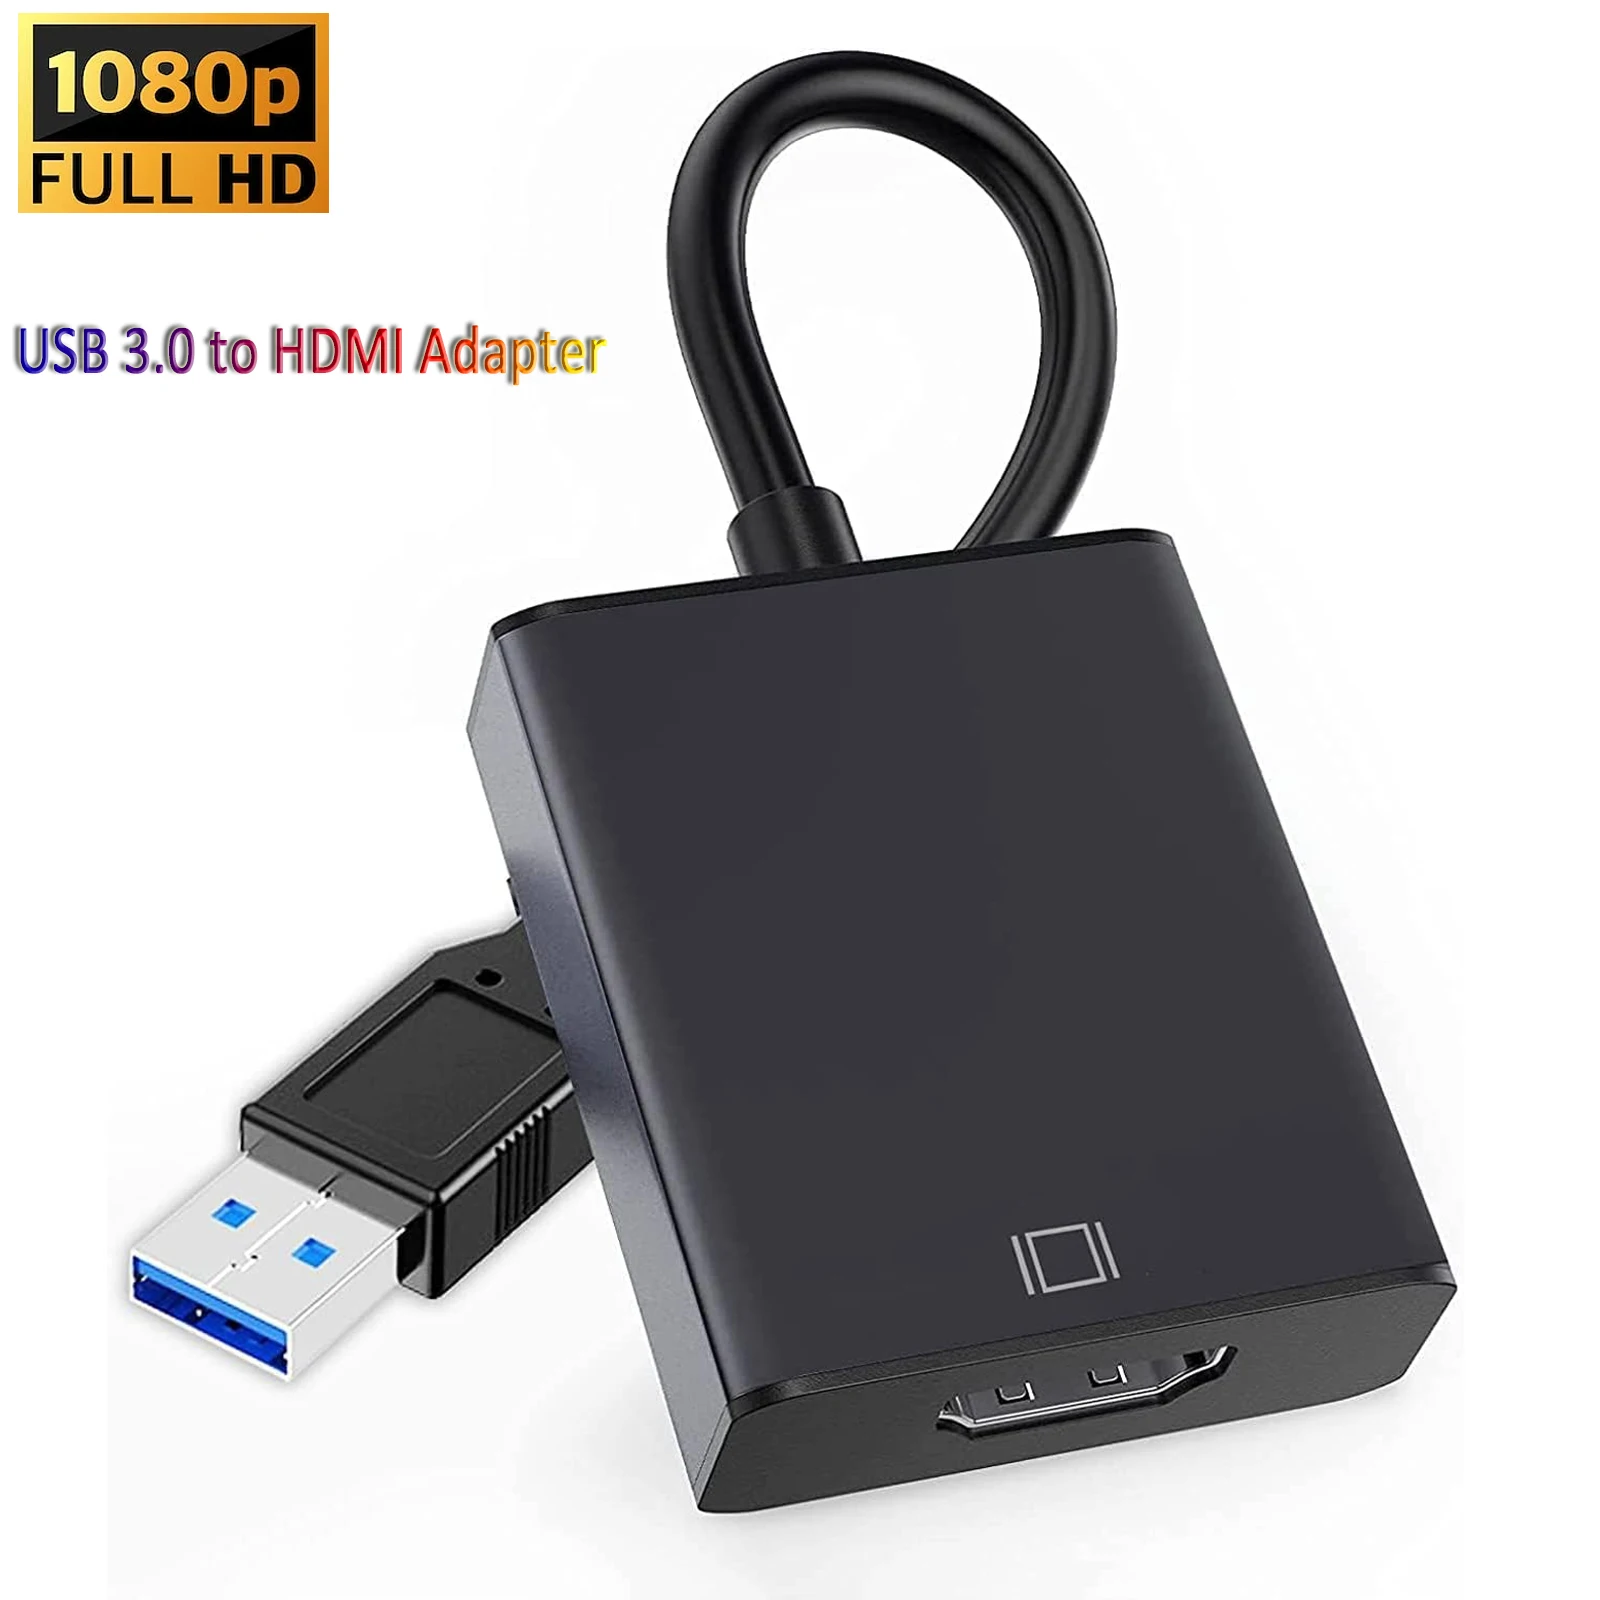 

USB to HDMI Adapter for Monitor Multiple, HDMI to USB 3.0 Adapter 1920 * 1080 for Windows 7/8/9/10/MAC OS HDMI converter